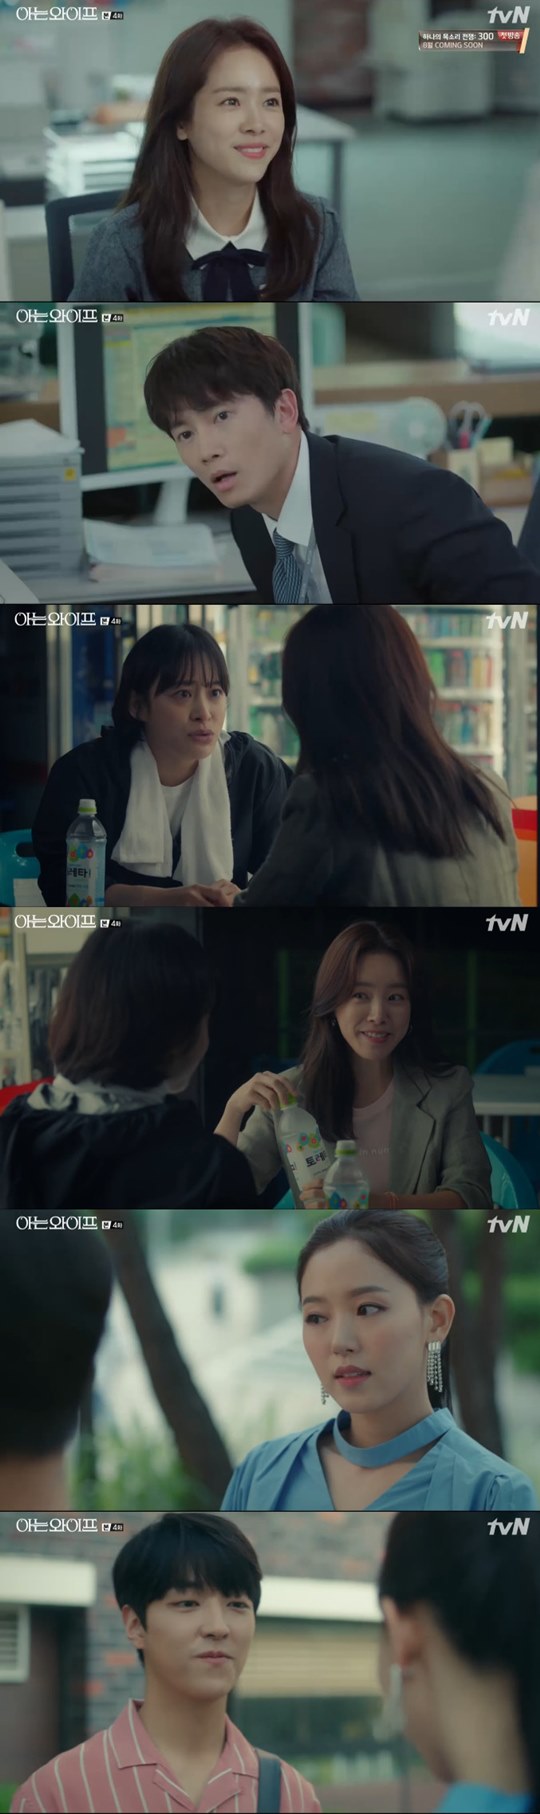 Knowing Wife Han Ji-min has continued to get involved with the surrounding people of Ji Sung.In the reality that Seo Woo Jin (Han Ji-min) was changed in the cable TV TVN tree drama Knowing Wife (playplayplayed by Yang Hee-seung and director Lee Sang-yeop), which was broadcast on the night of the 9th, he made a relationship with the surrounding people of Cha Ju-hyuk (Ji Sung).Cha Ju-hyuk continued to observe the Sea Woo Jin, who met again.Cha Ju-hyuk could not take his eyes off Lee Woo-jin, who was completely different from his wife.Also, Cha Ju-hyuk was not able to hide his familiarity with Seo Woo Jin: knowing the habits of Seo Woo Jin who could not eat coffee and ordering his favorite beverage on his behalf.World Bank Direct One questioned Cha Ju-hyuk, who knows well about Seo Woo Jin.The mood of the World Bank has changed since the arrival of Seo Woo Jin. Yoon Jong-hoo (Jang Seung-jo) pointed out the brightening atmosphere, saying, One person has come new, but the air current has changed strangely.On the other hand, World Bank womens direct Ones were wary of Seo Woo Jin, saying, It is a little strange to be wild, It tends to shed on men.Seo Woo Jin and Cha Ju-eun (Park Hee-von) formed a relationship in the wake of a bicycle accident.Cha Joo-eun treated Seo Woo Jin with a friendly it is not unfamiliar and the two became friends.Meanwhile, Lee Hye-One reunited with Jeong Hyonsoo (Lee Yu-jin) on campus.Jing Hyonsoo asked Lee Hye to eat together, but Lee Hye avoided the seat, refusing to eat the meal, although Jing Hyonsoo was conscious.